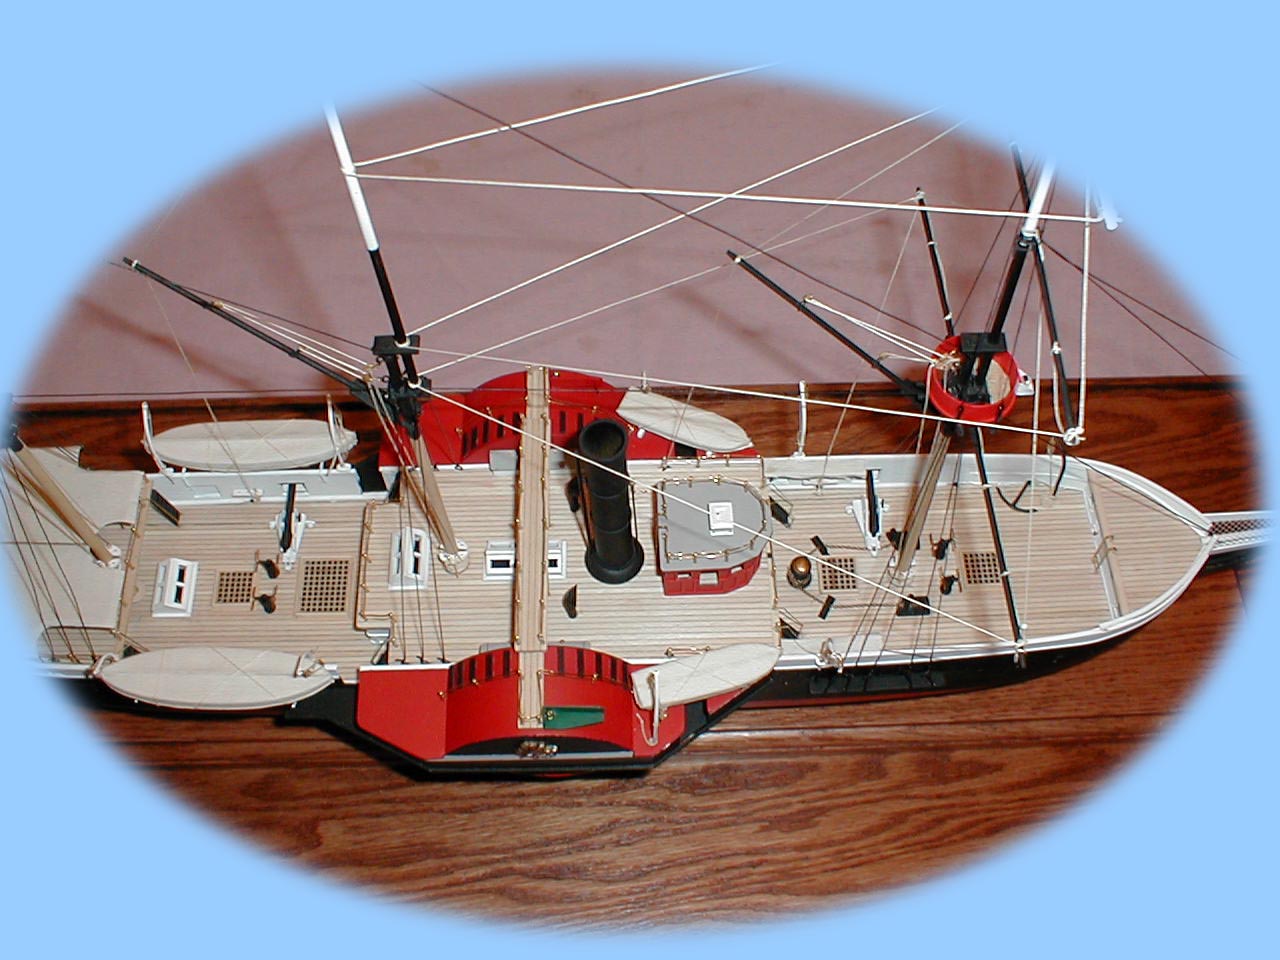 Detail view of the model